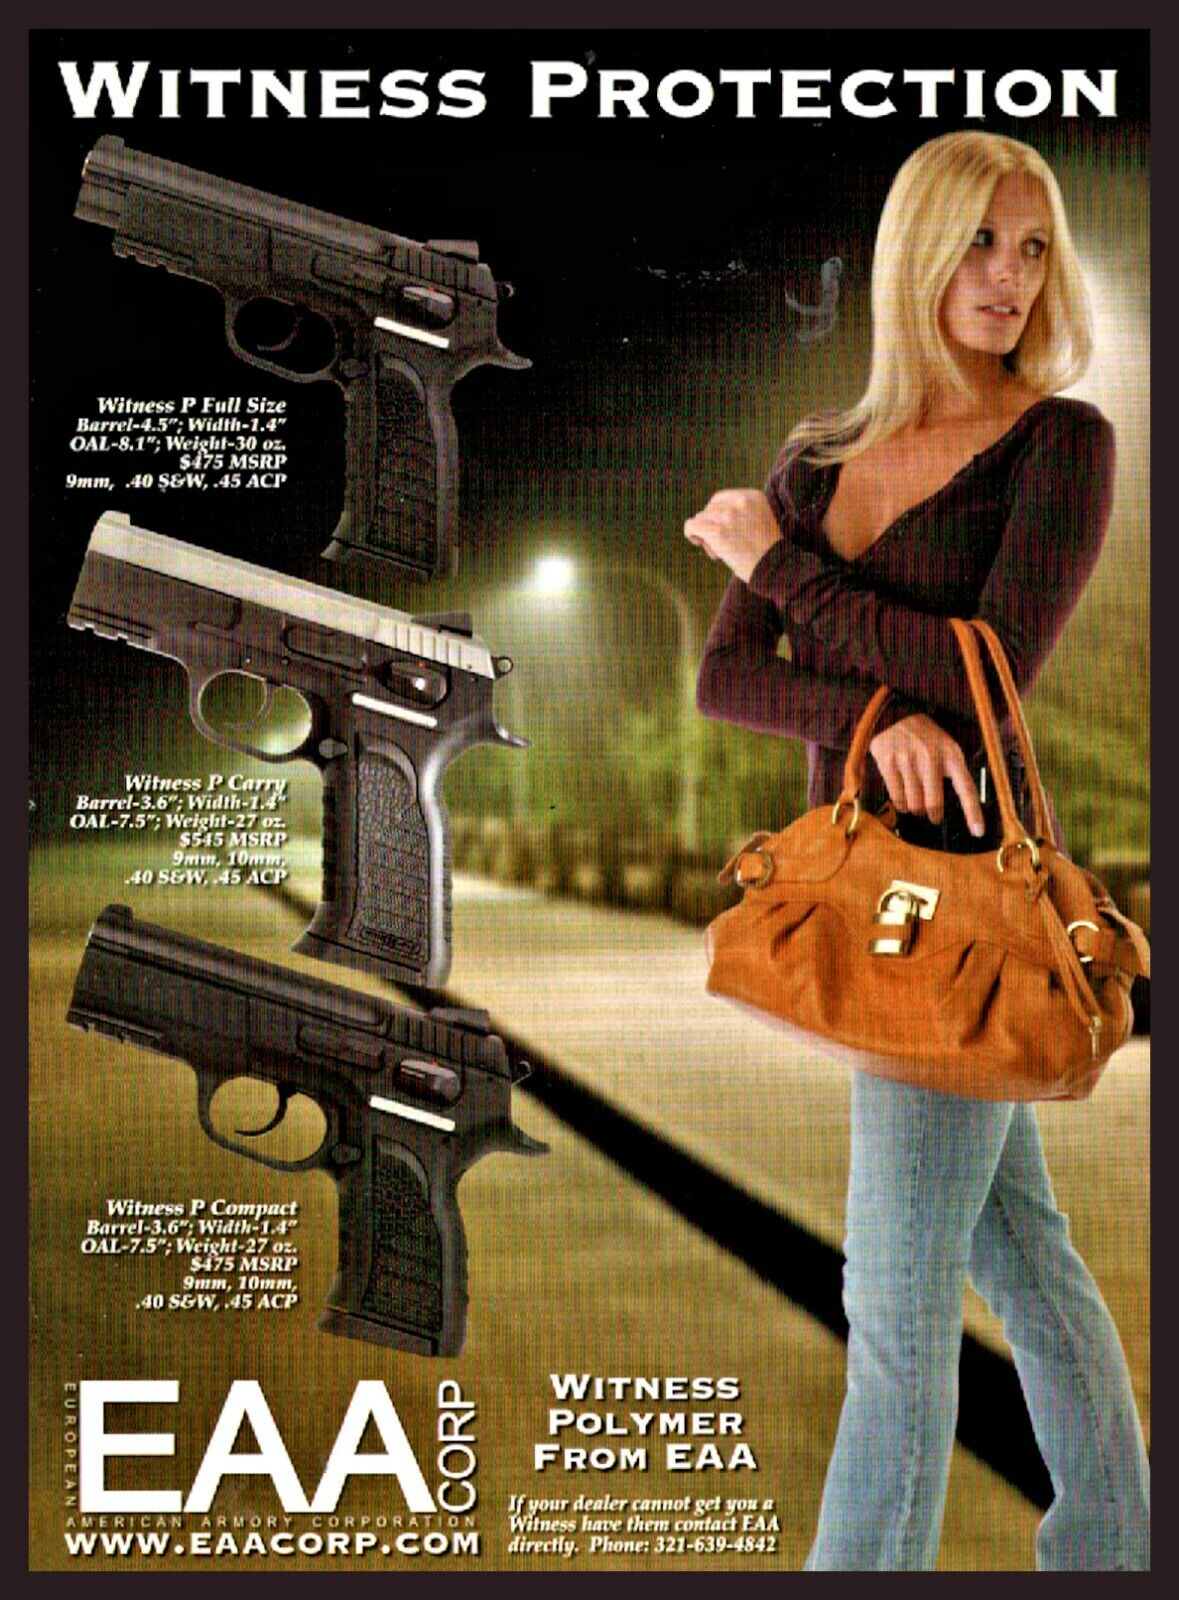 2008 EAA Witness P Full Size  Carry and Compact Pistol European American Arms AD